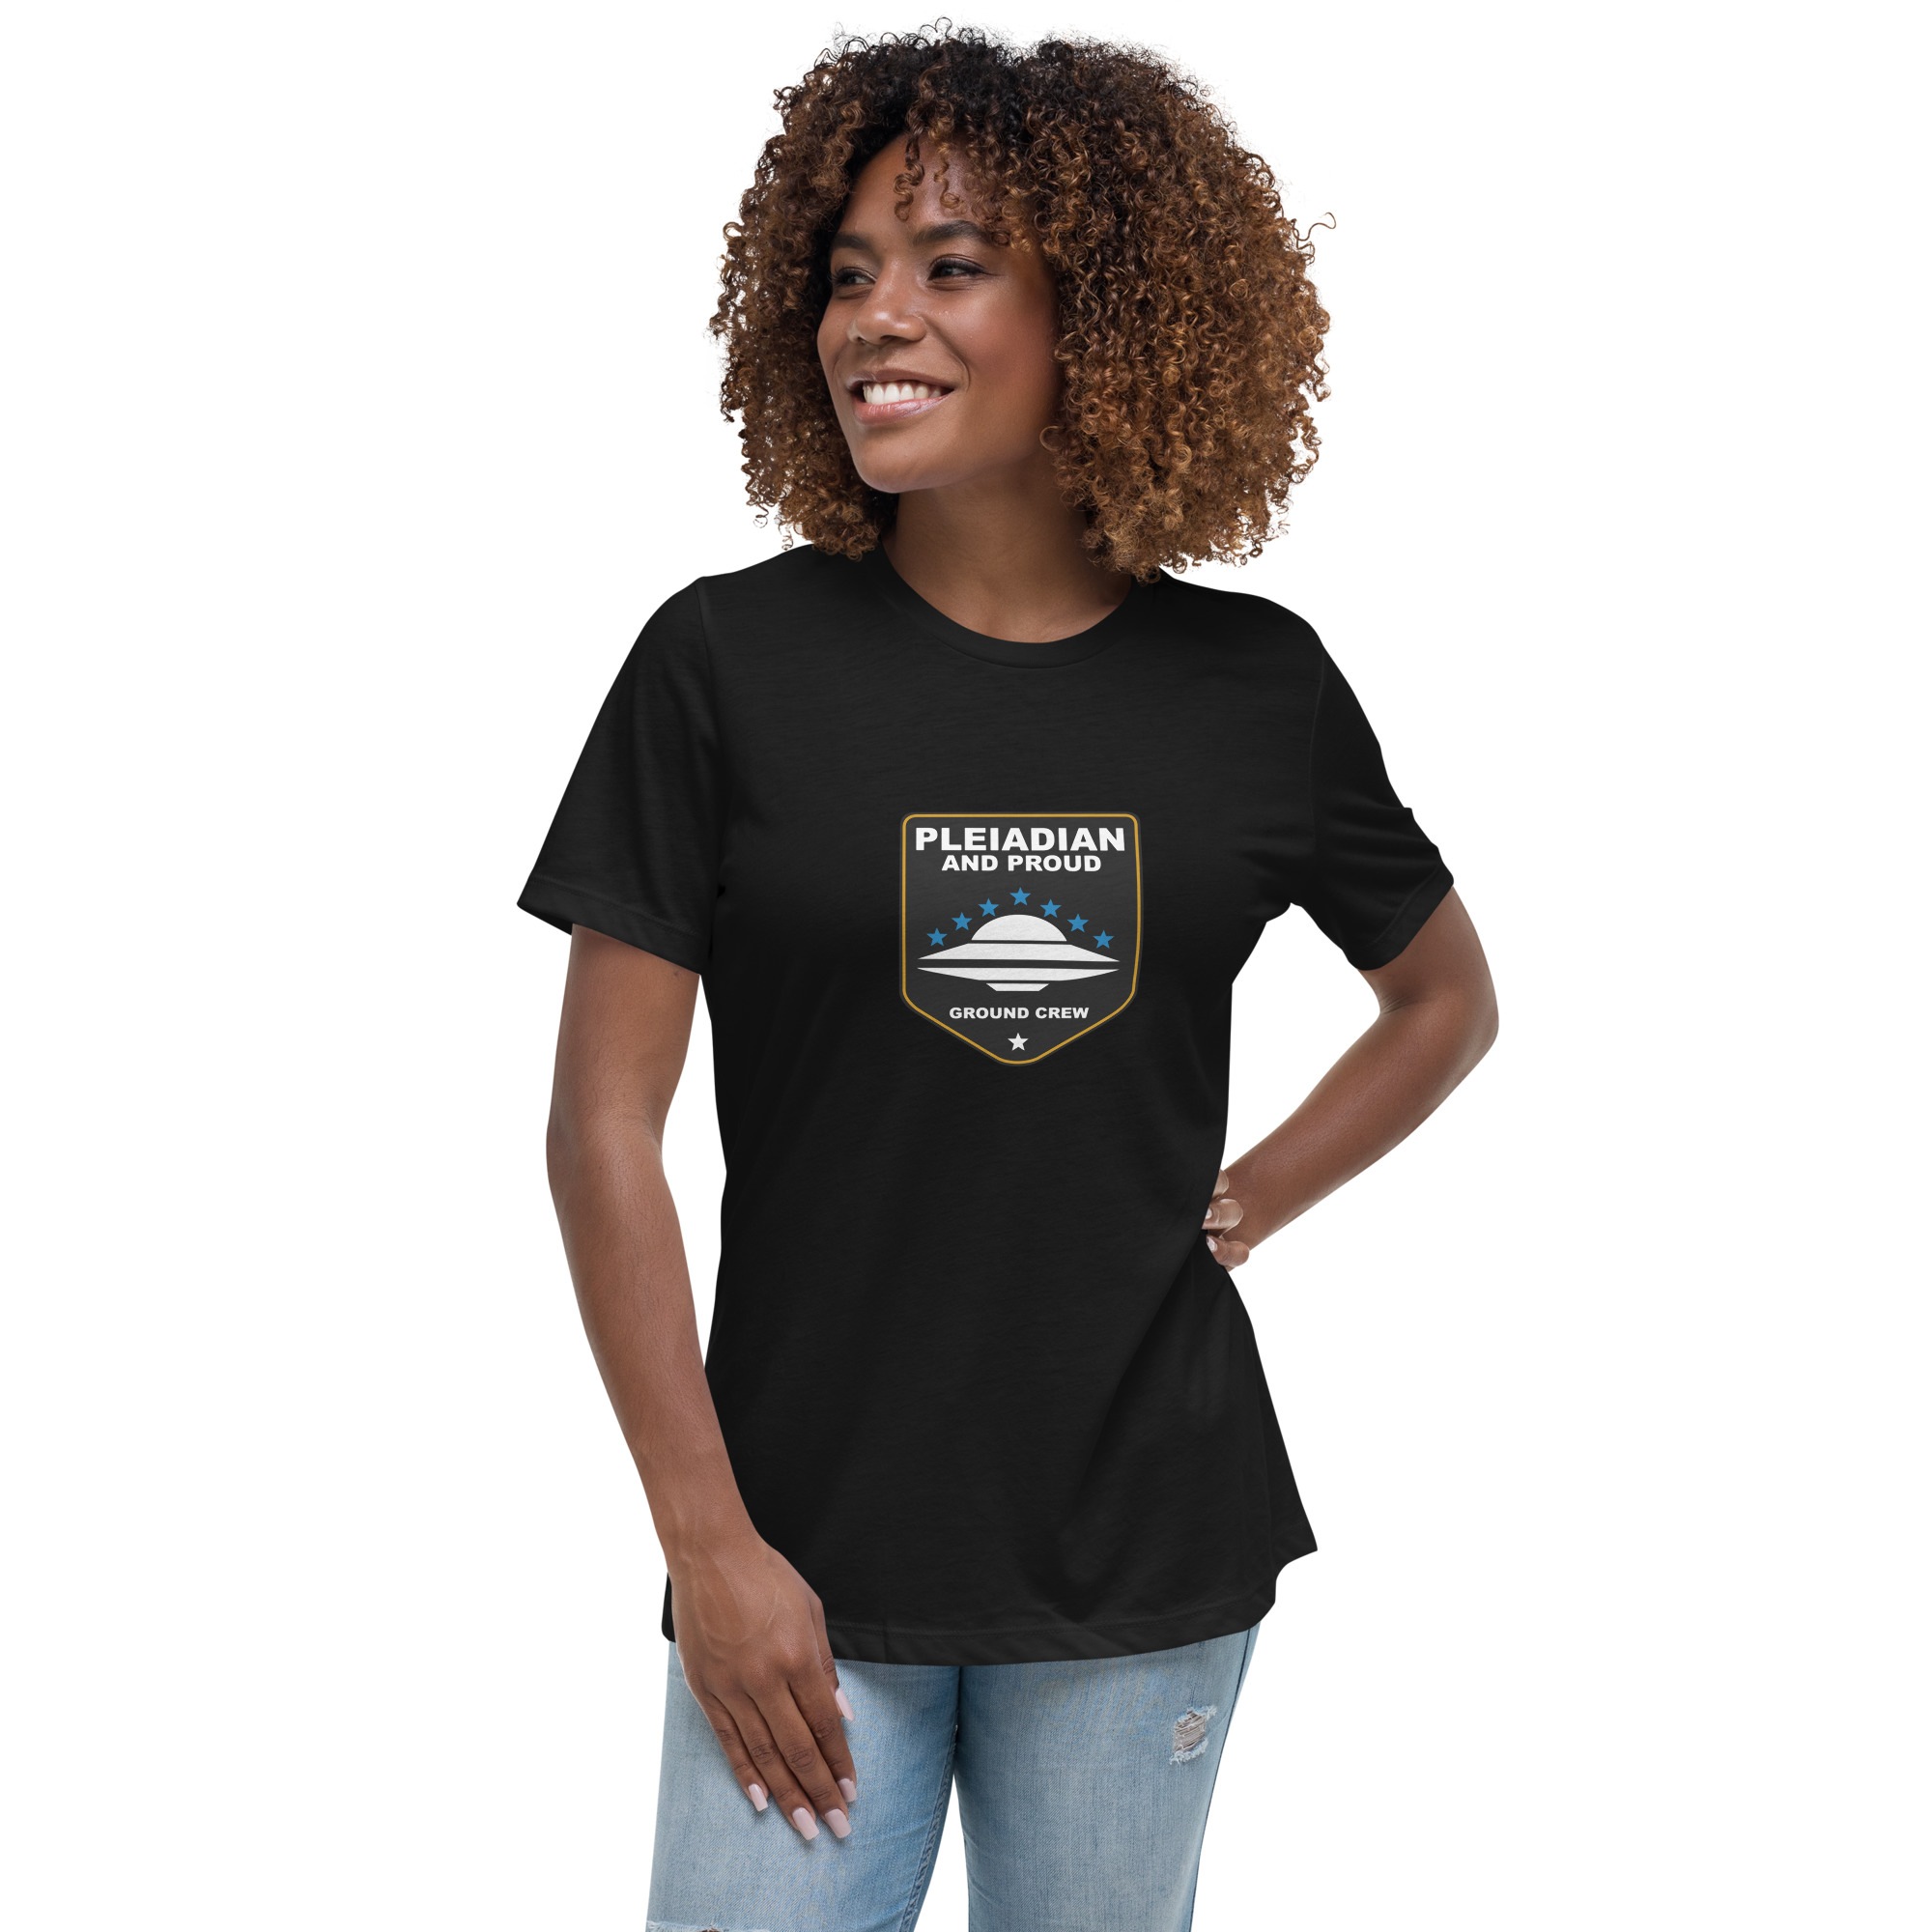 Pleiadian and Proud Women's Tshirt